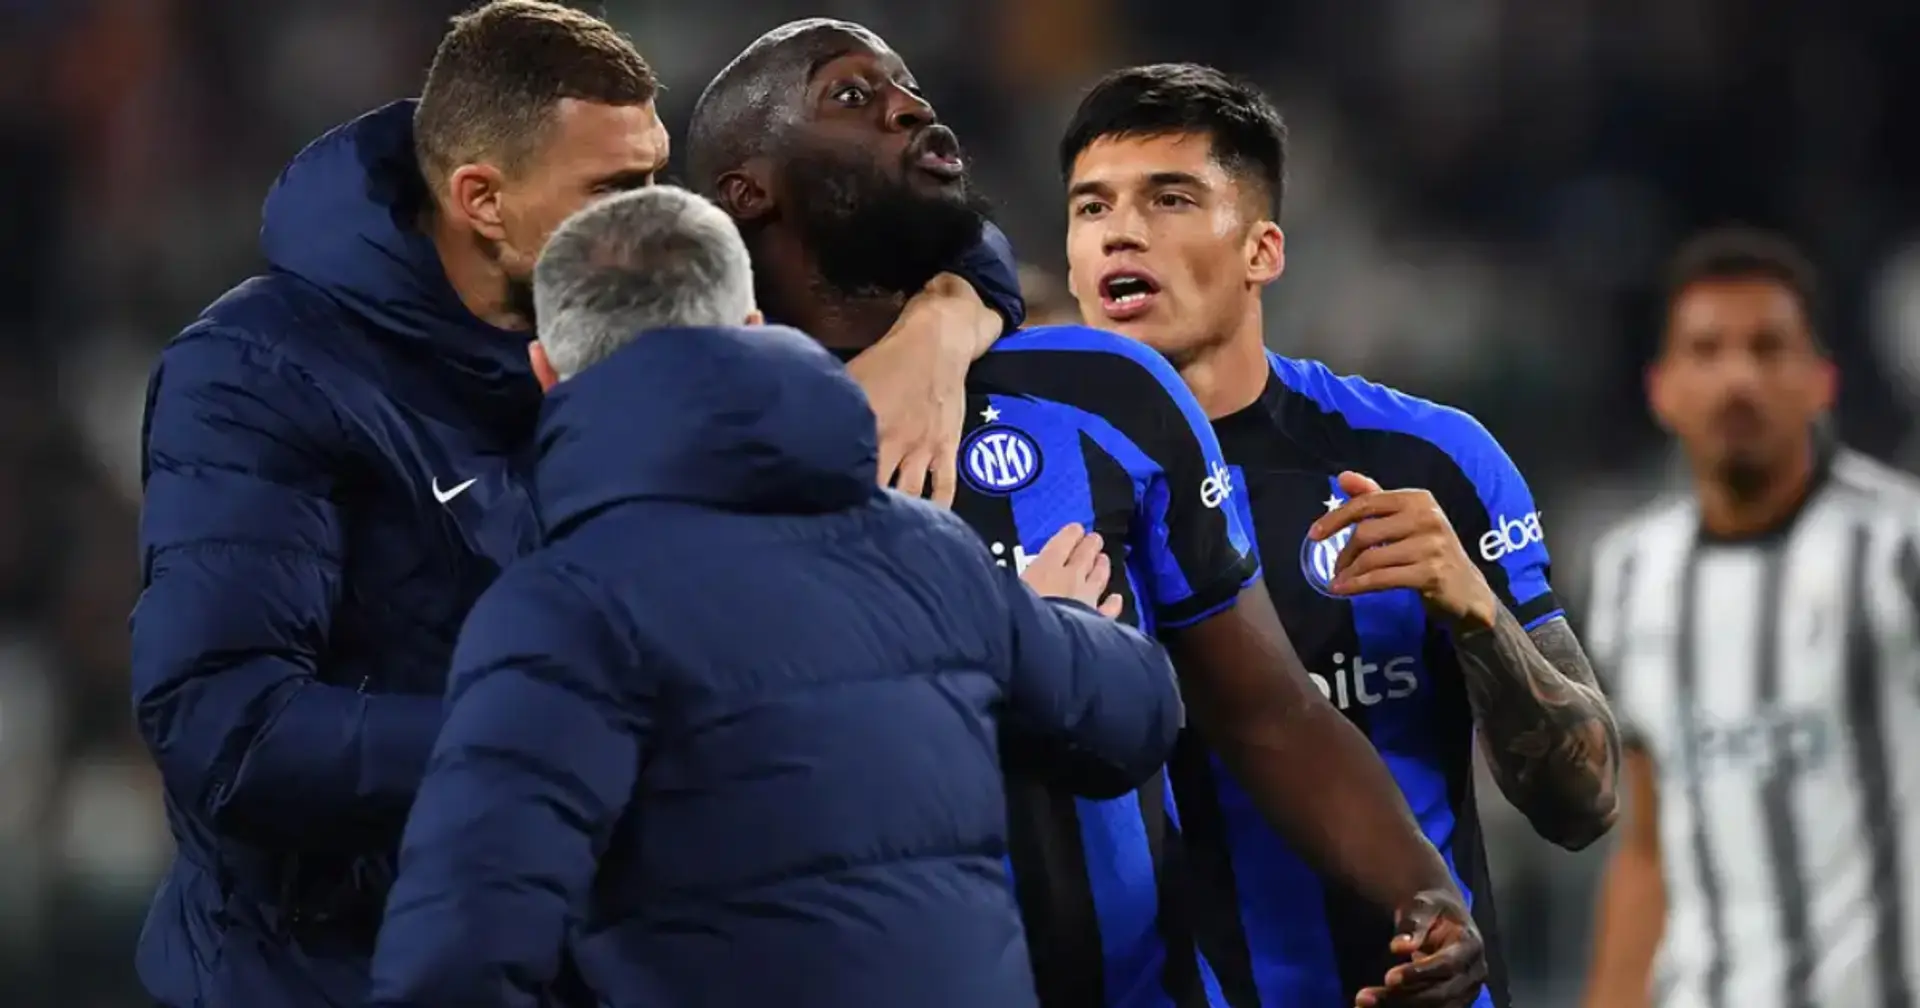 Chelsea send message to Lukaku after striker suffers racist abuse from Juventus fans